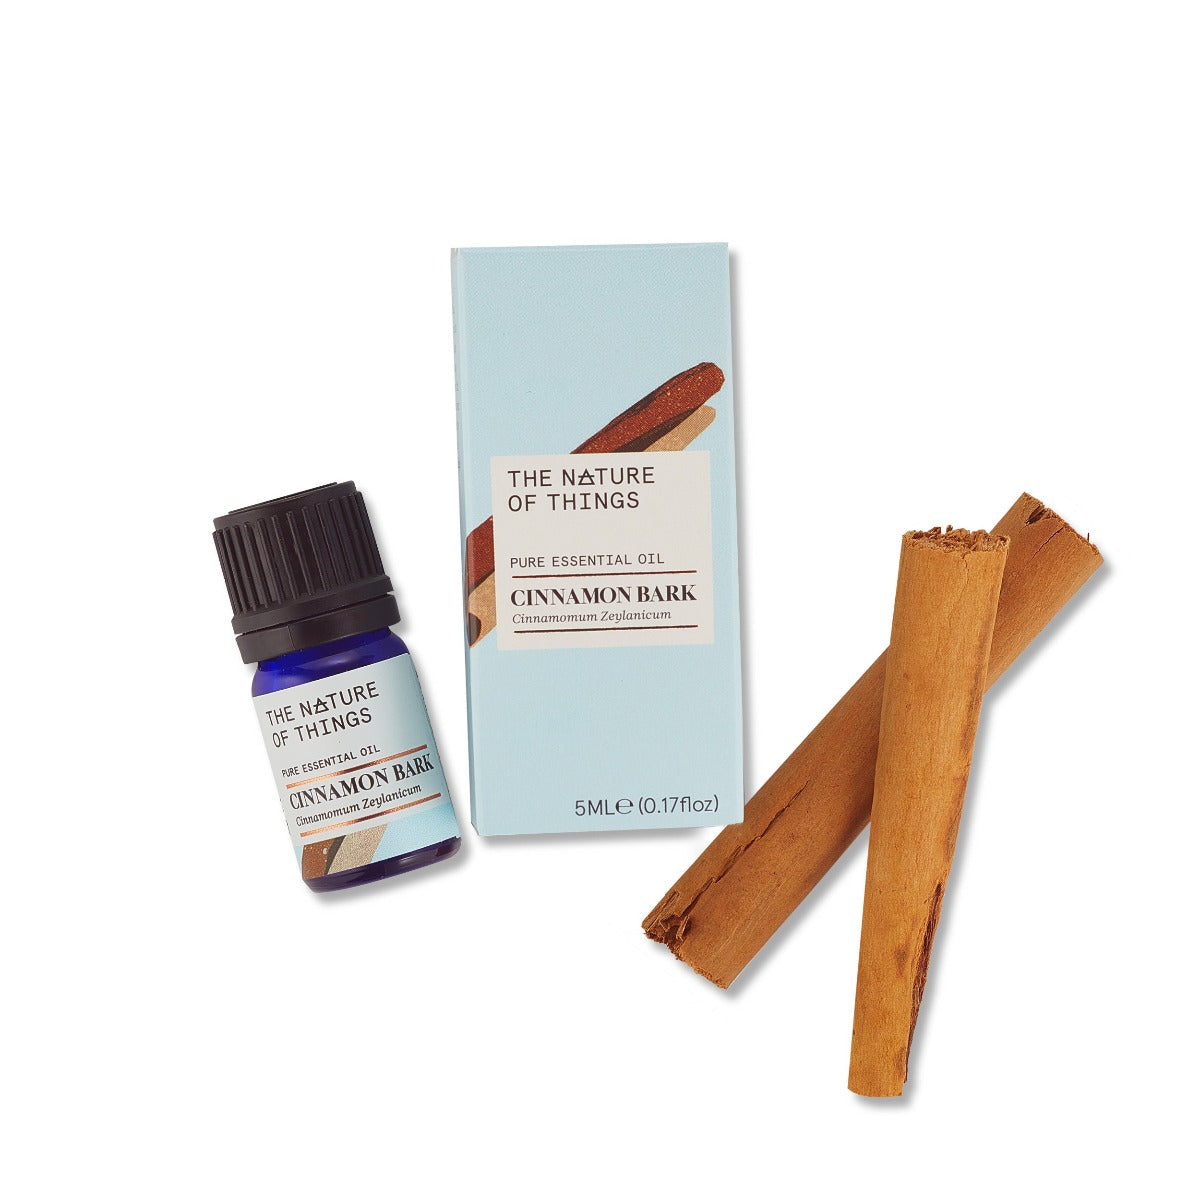 Cinnamon Bark Essential Oil from The Nature of Things